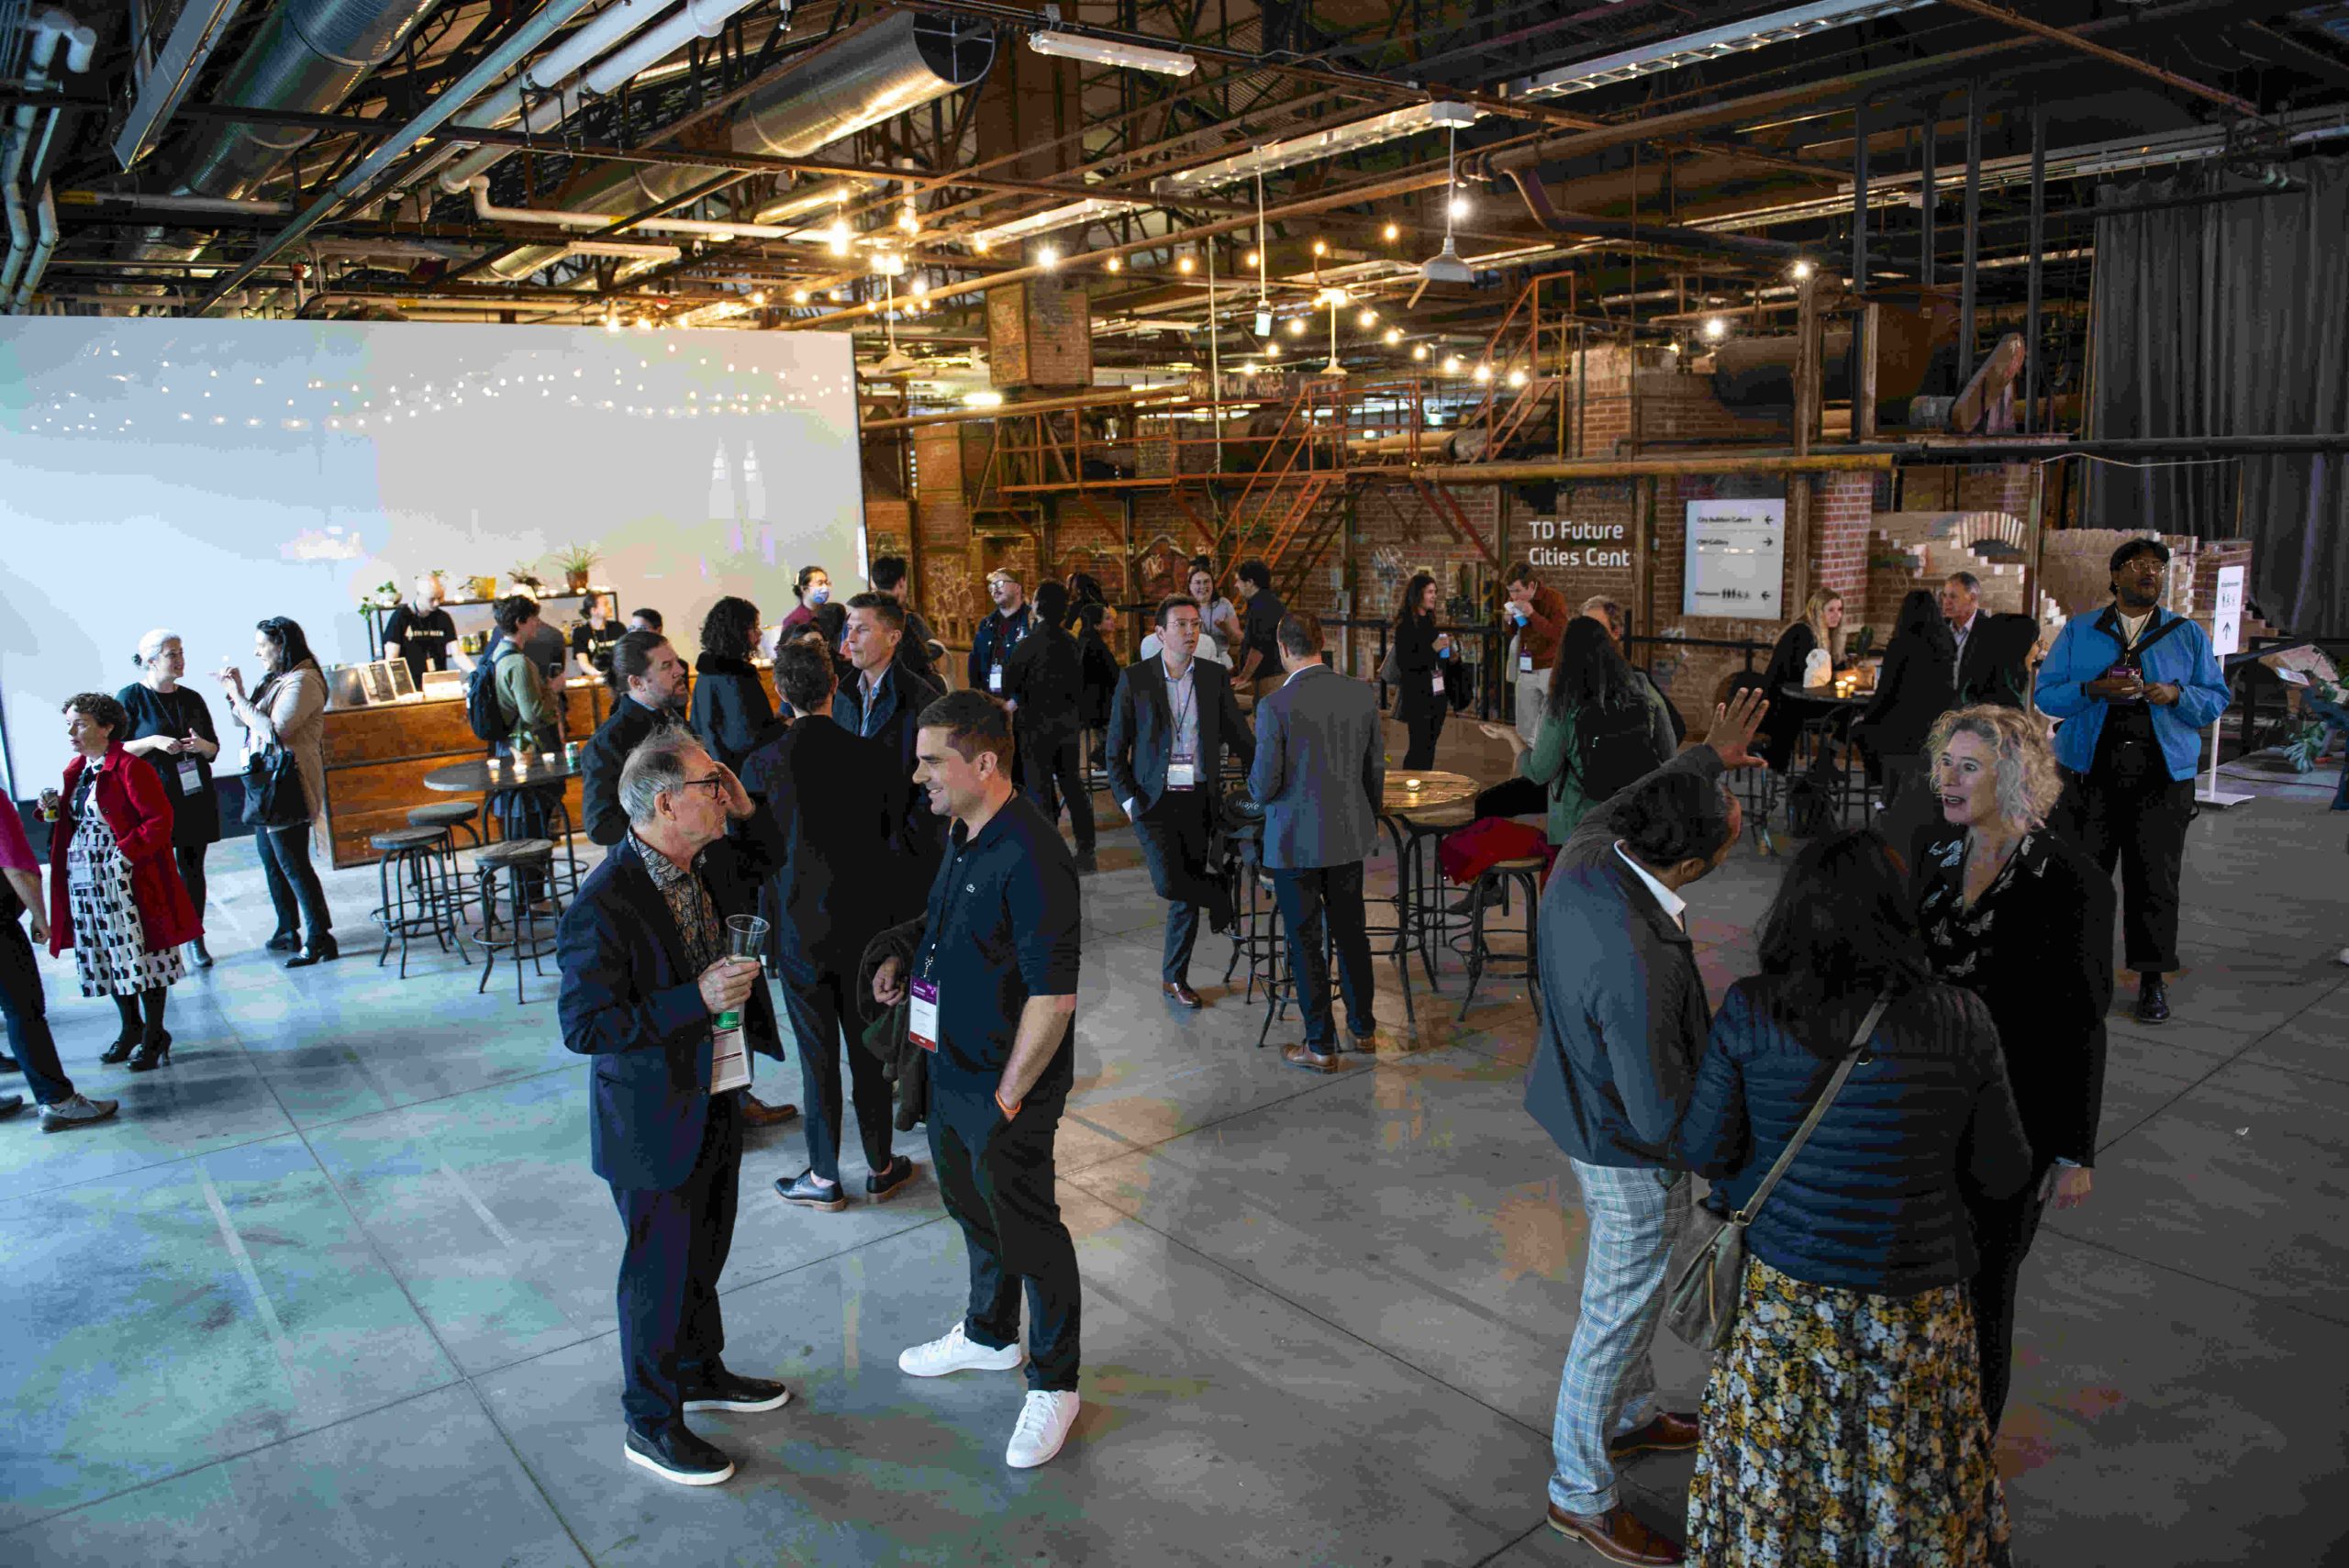 People mingle around during networking event in industrial looking indoor space